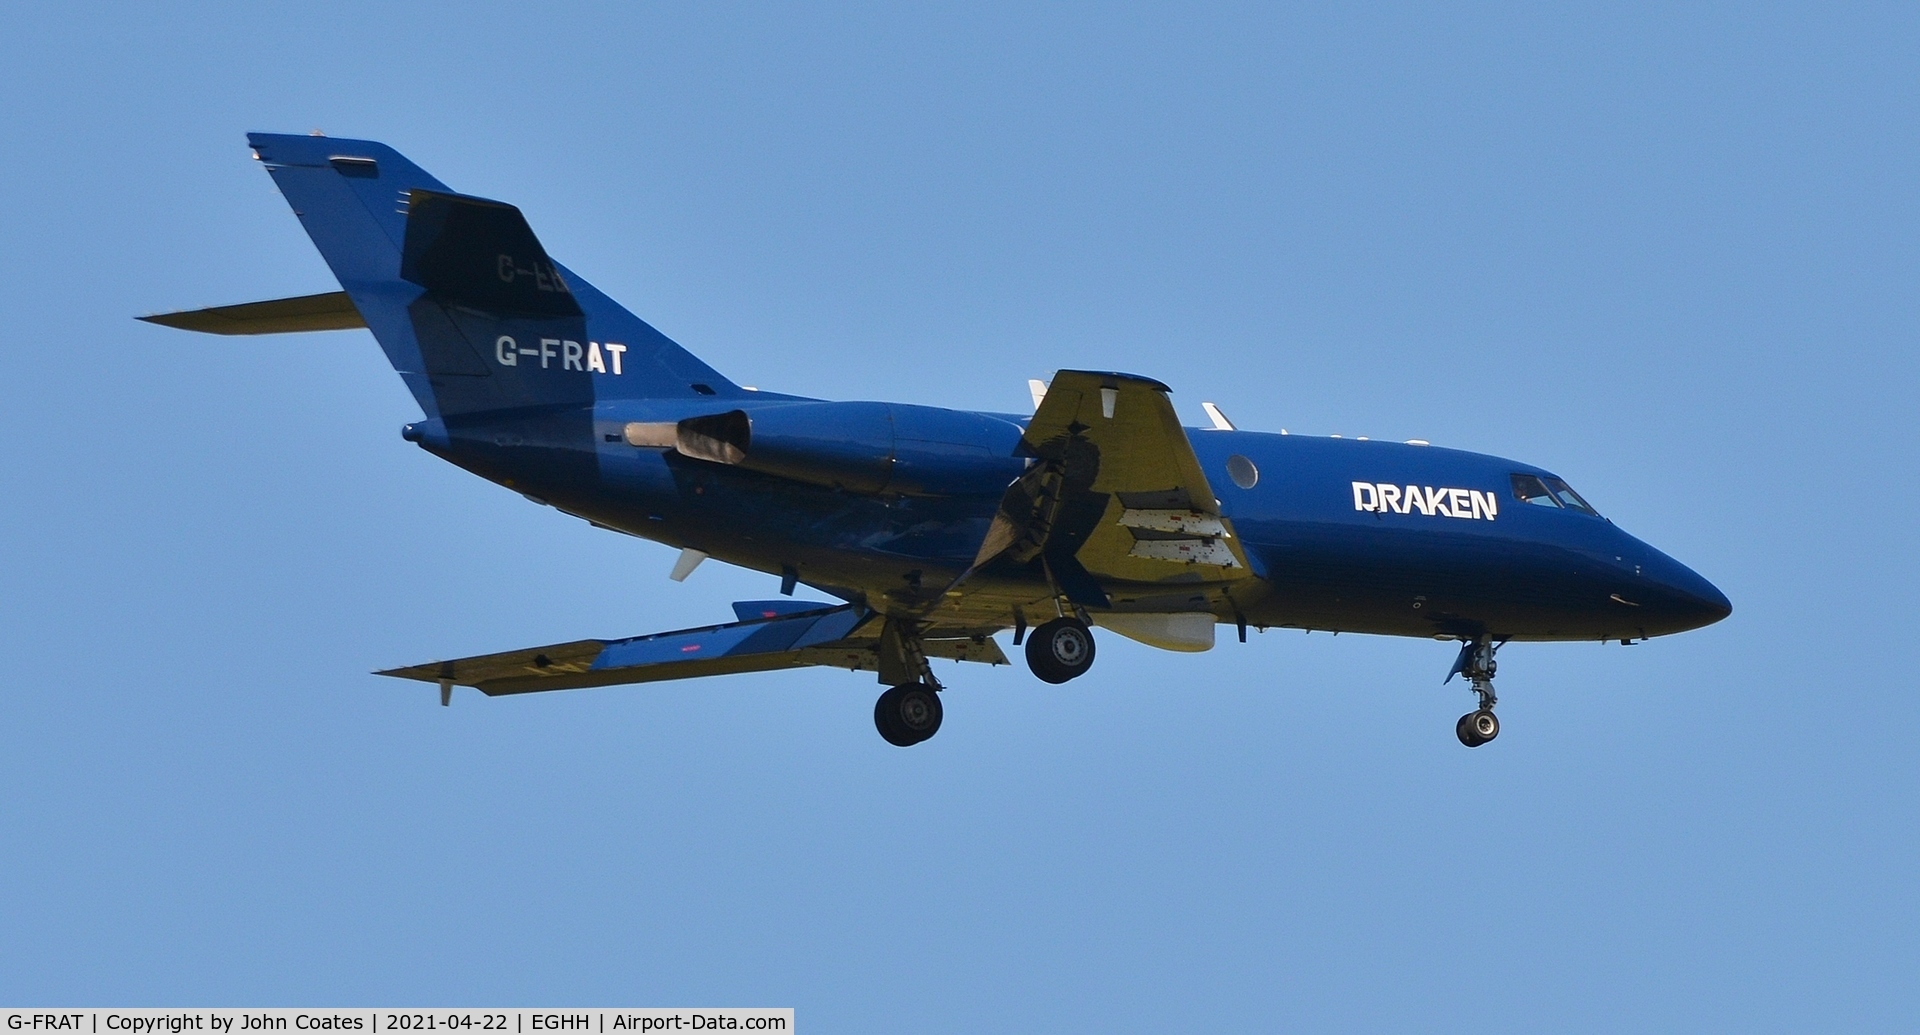 G-FRAT, 1967 Dassault Falcon (Mystere) 20DC C/N 87, Finals to 08 with new Draken titles